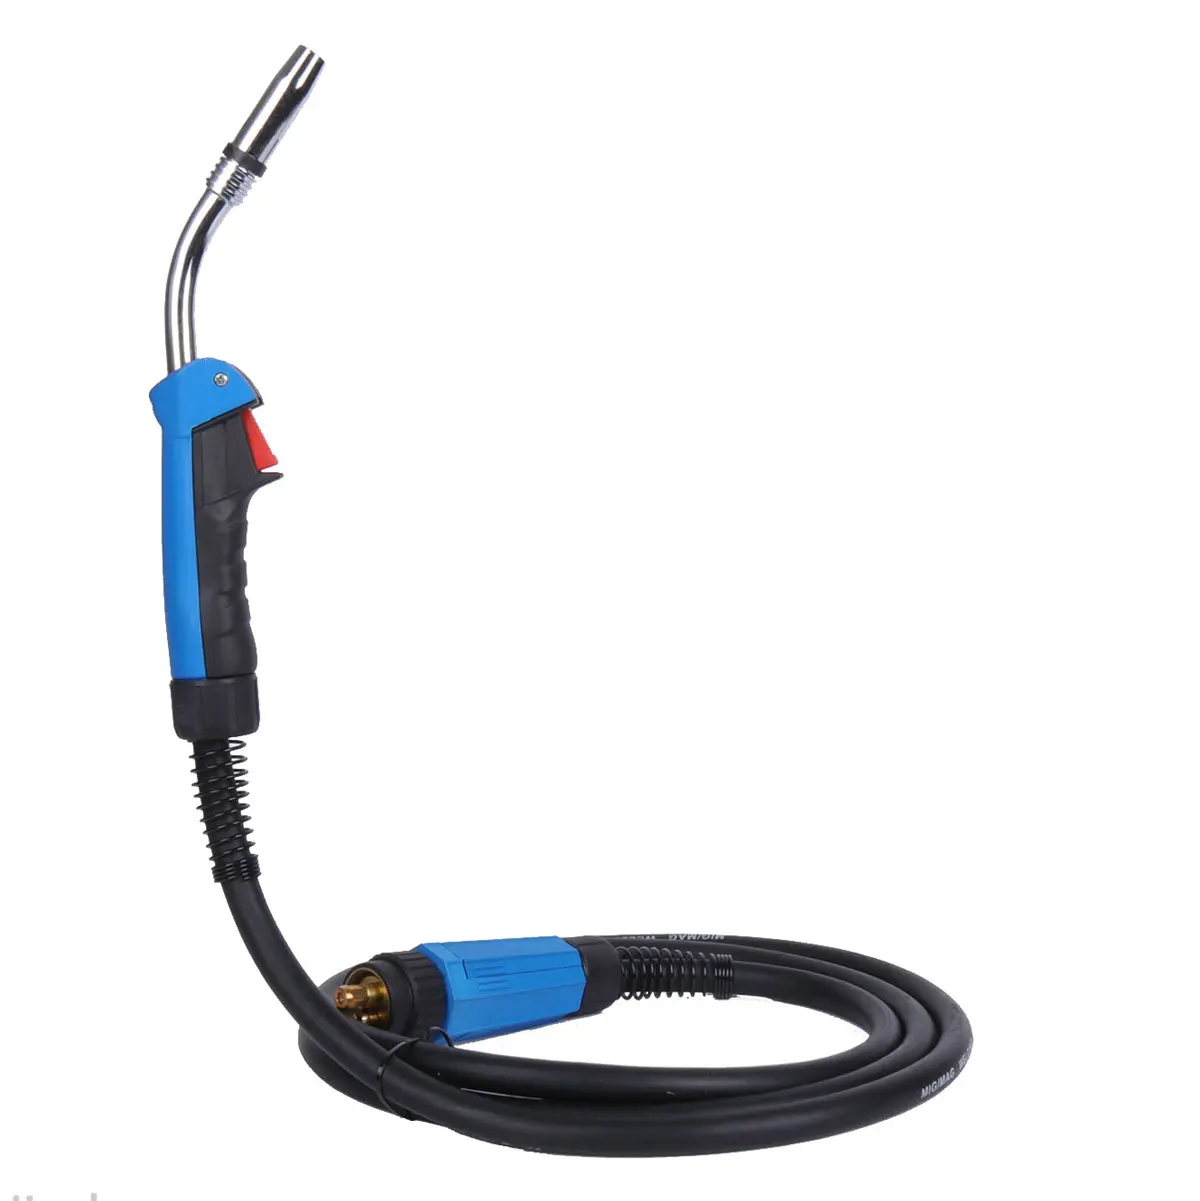 3Meters 24KD Mig Torch Professional 250A MAG Welding Torch Gun Air-cooled Euro Connector for MIG MAG Welding Machine